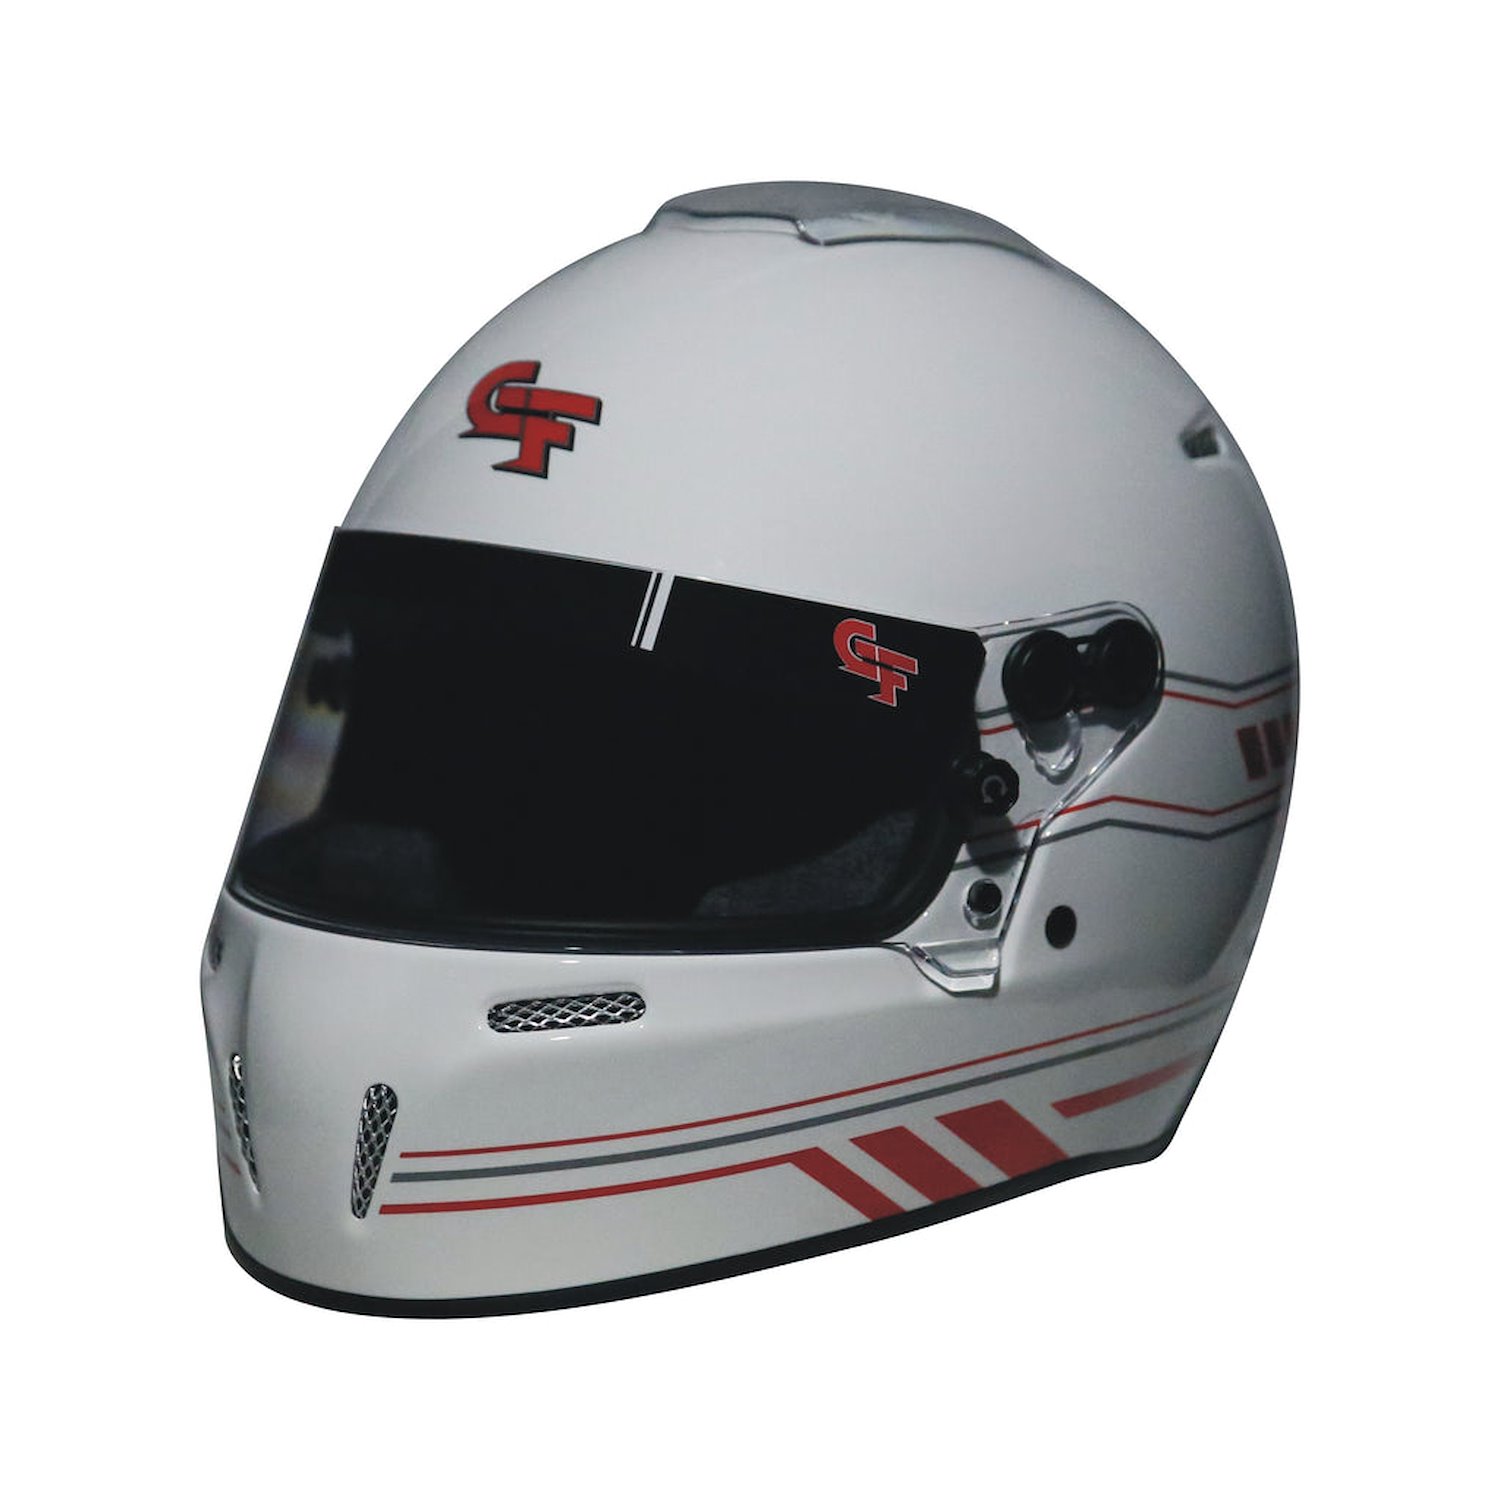 14102SMLW2 Helmet, Nighthawk Graphics SA2020, Small, White/Red